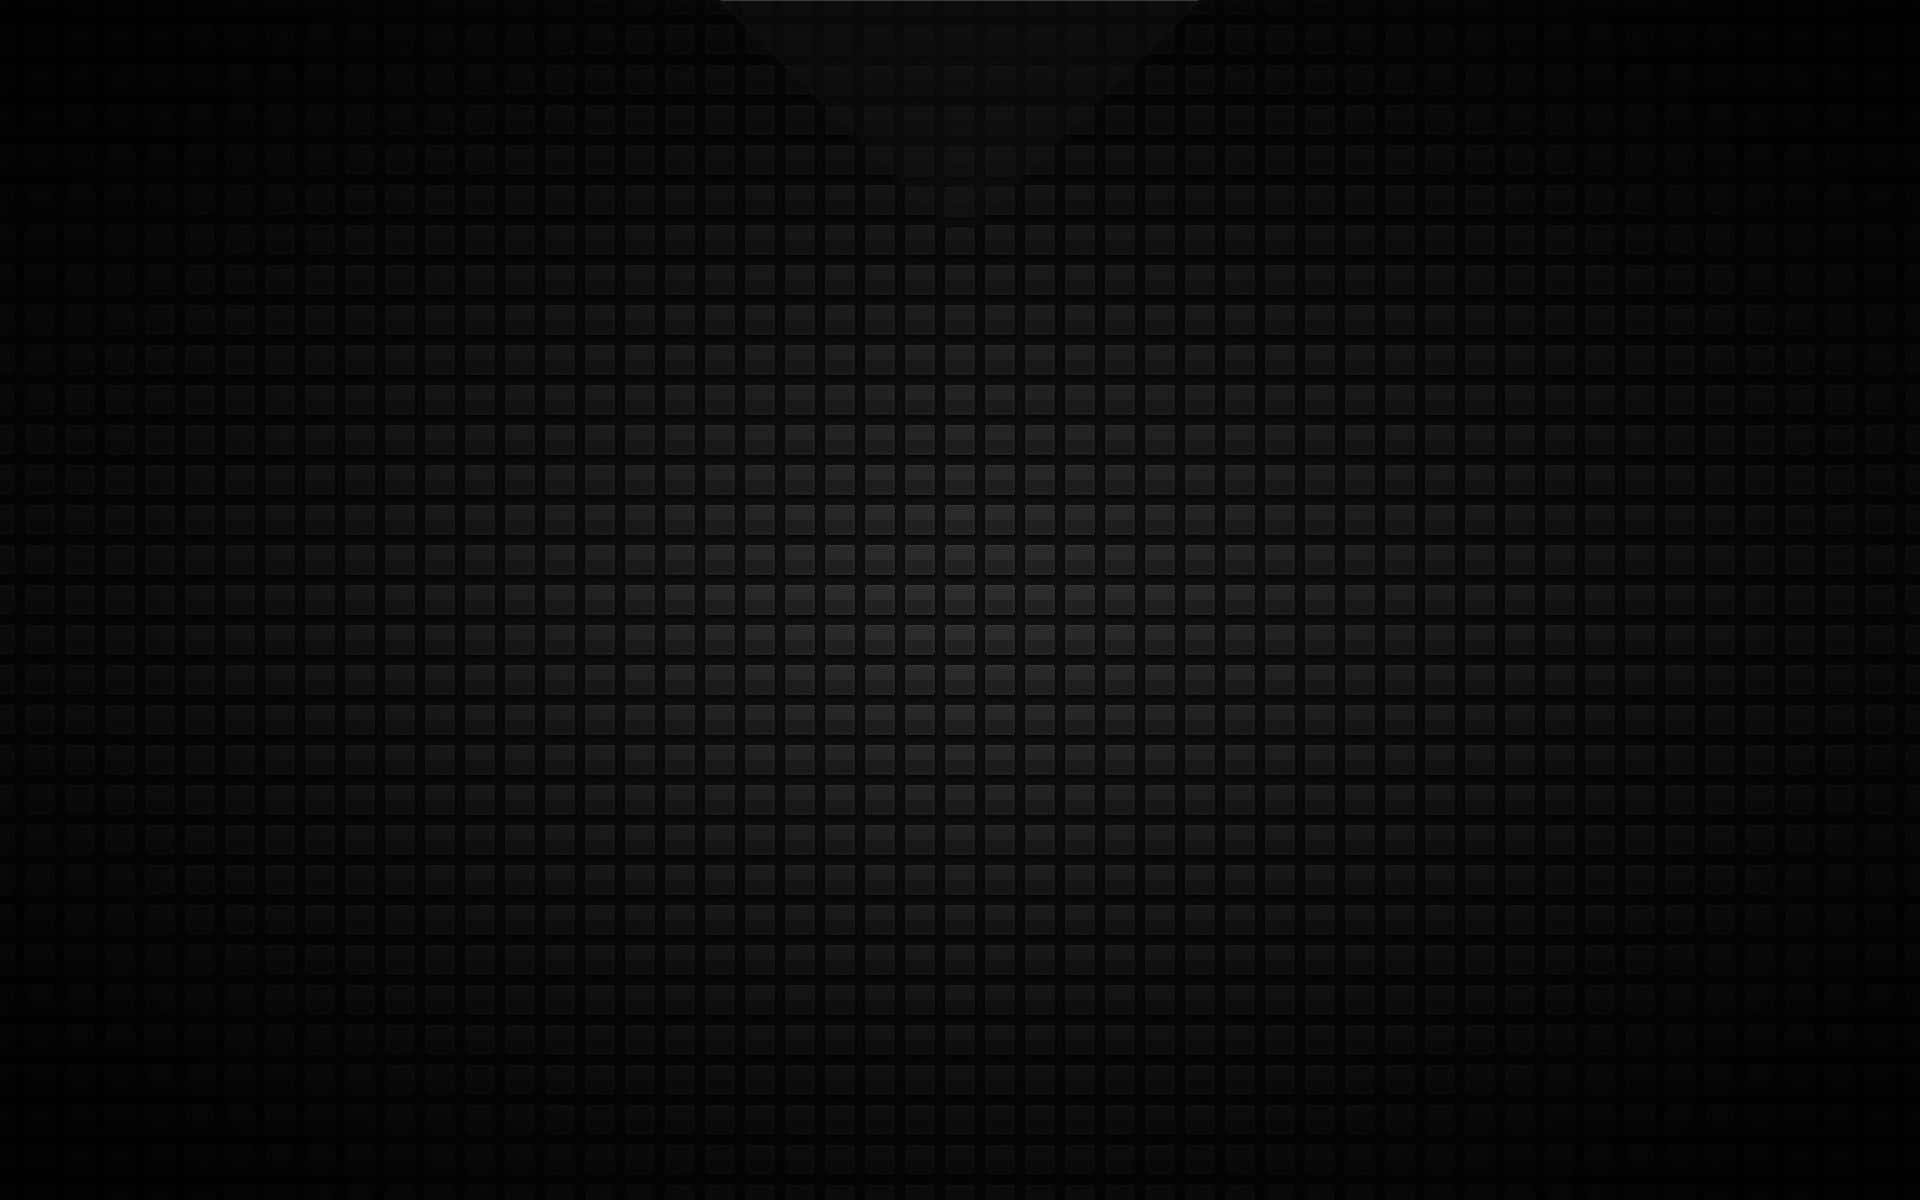 A Black Background With A Square Pattern